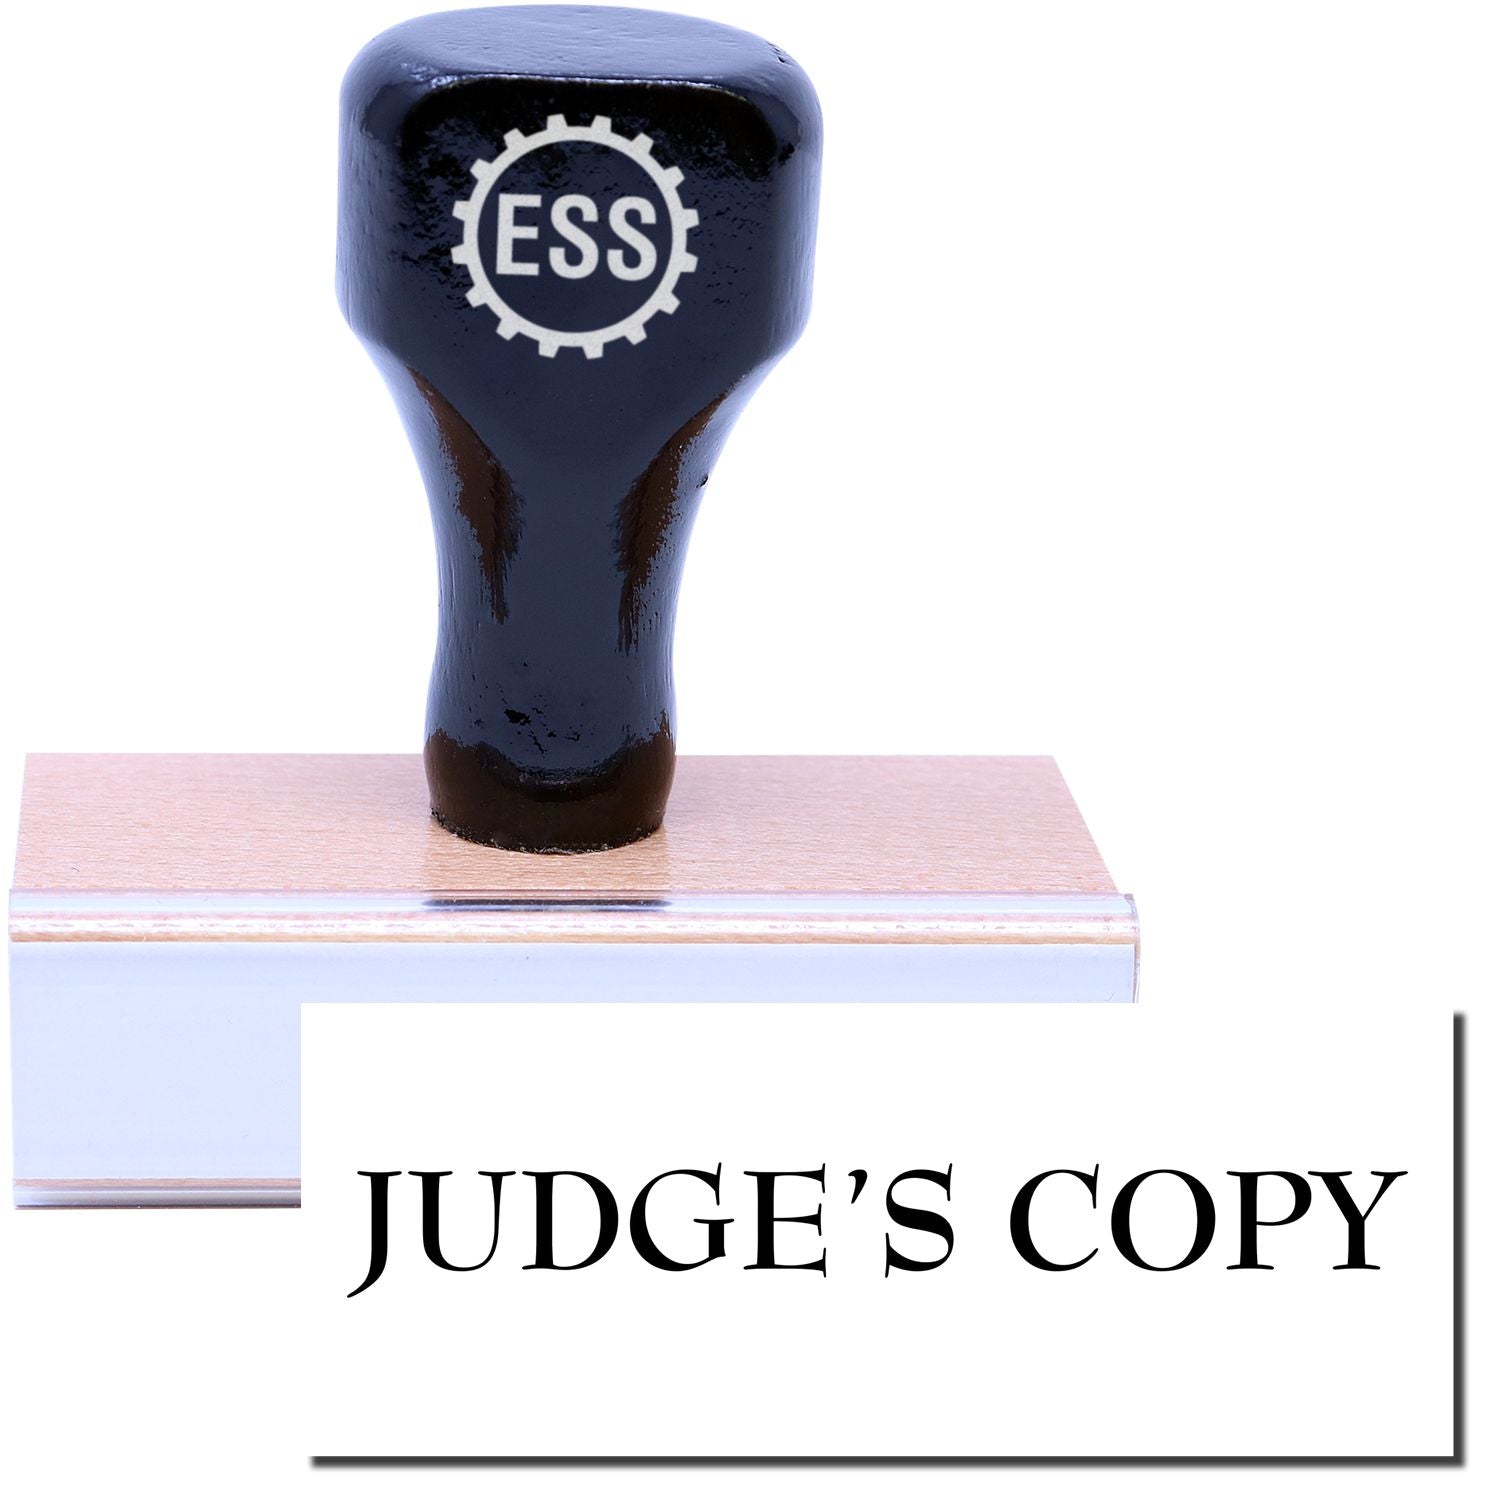 A stock office legal rubber stamp with a stamped image showing how the text "JUDGE'S COPY" is displayed after stamping.